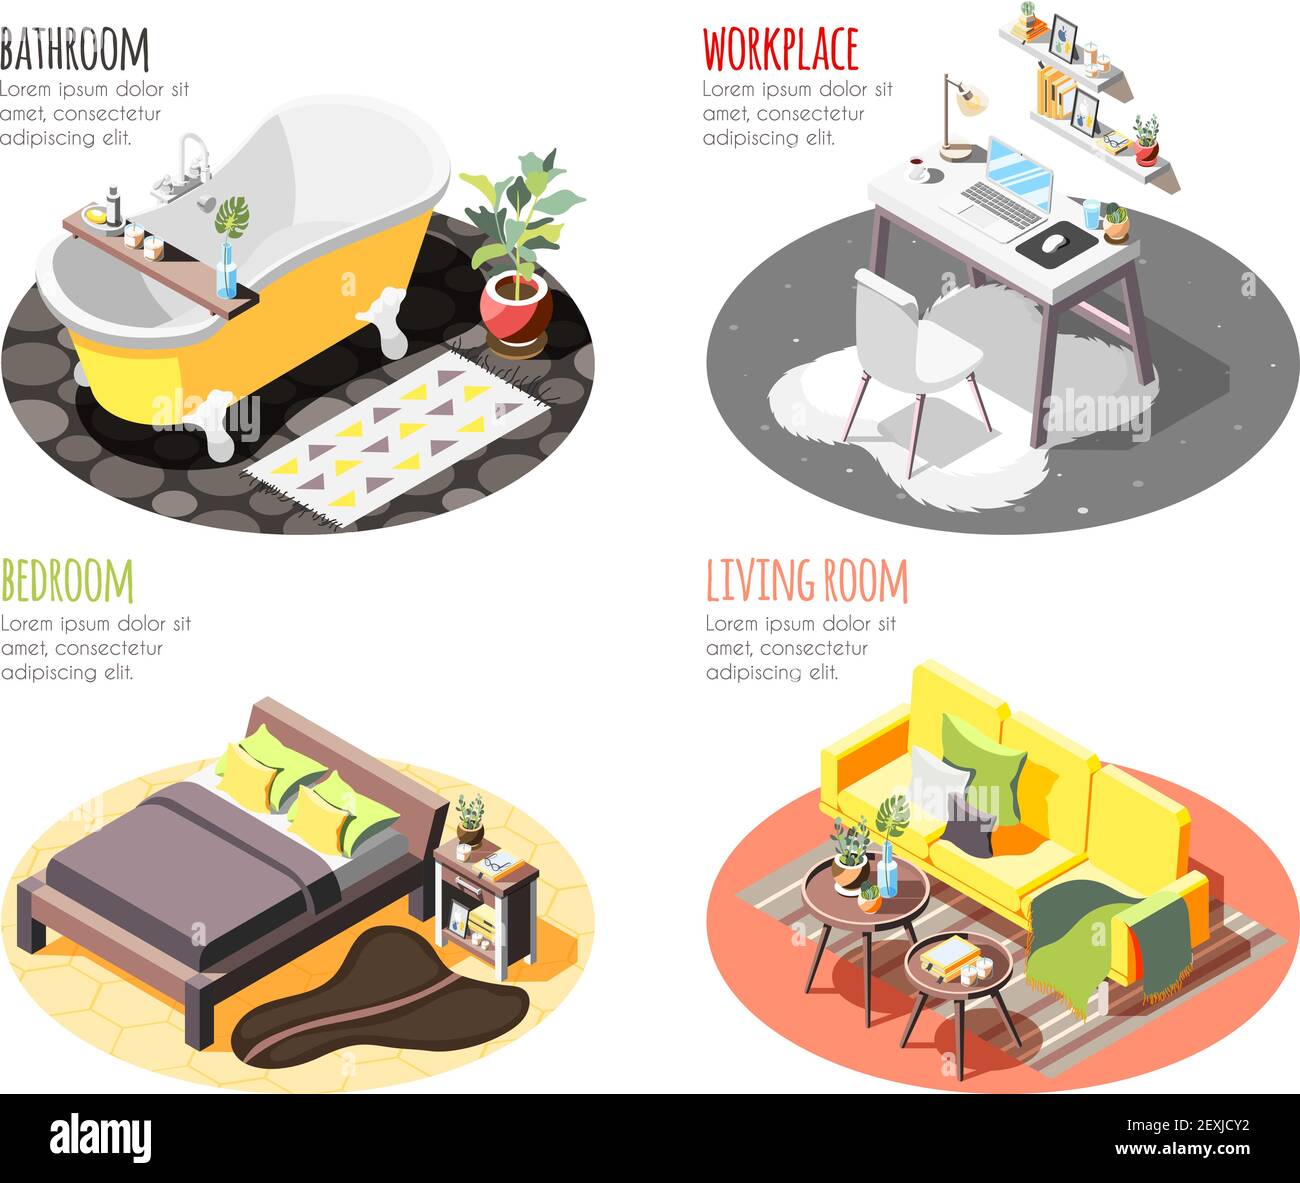 Loft interior isometric 4x1 set of compositions with images of domestic spots with furniture and text vector illustration Stock Vector